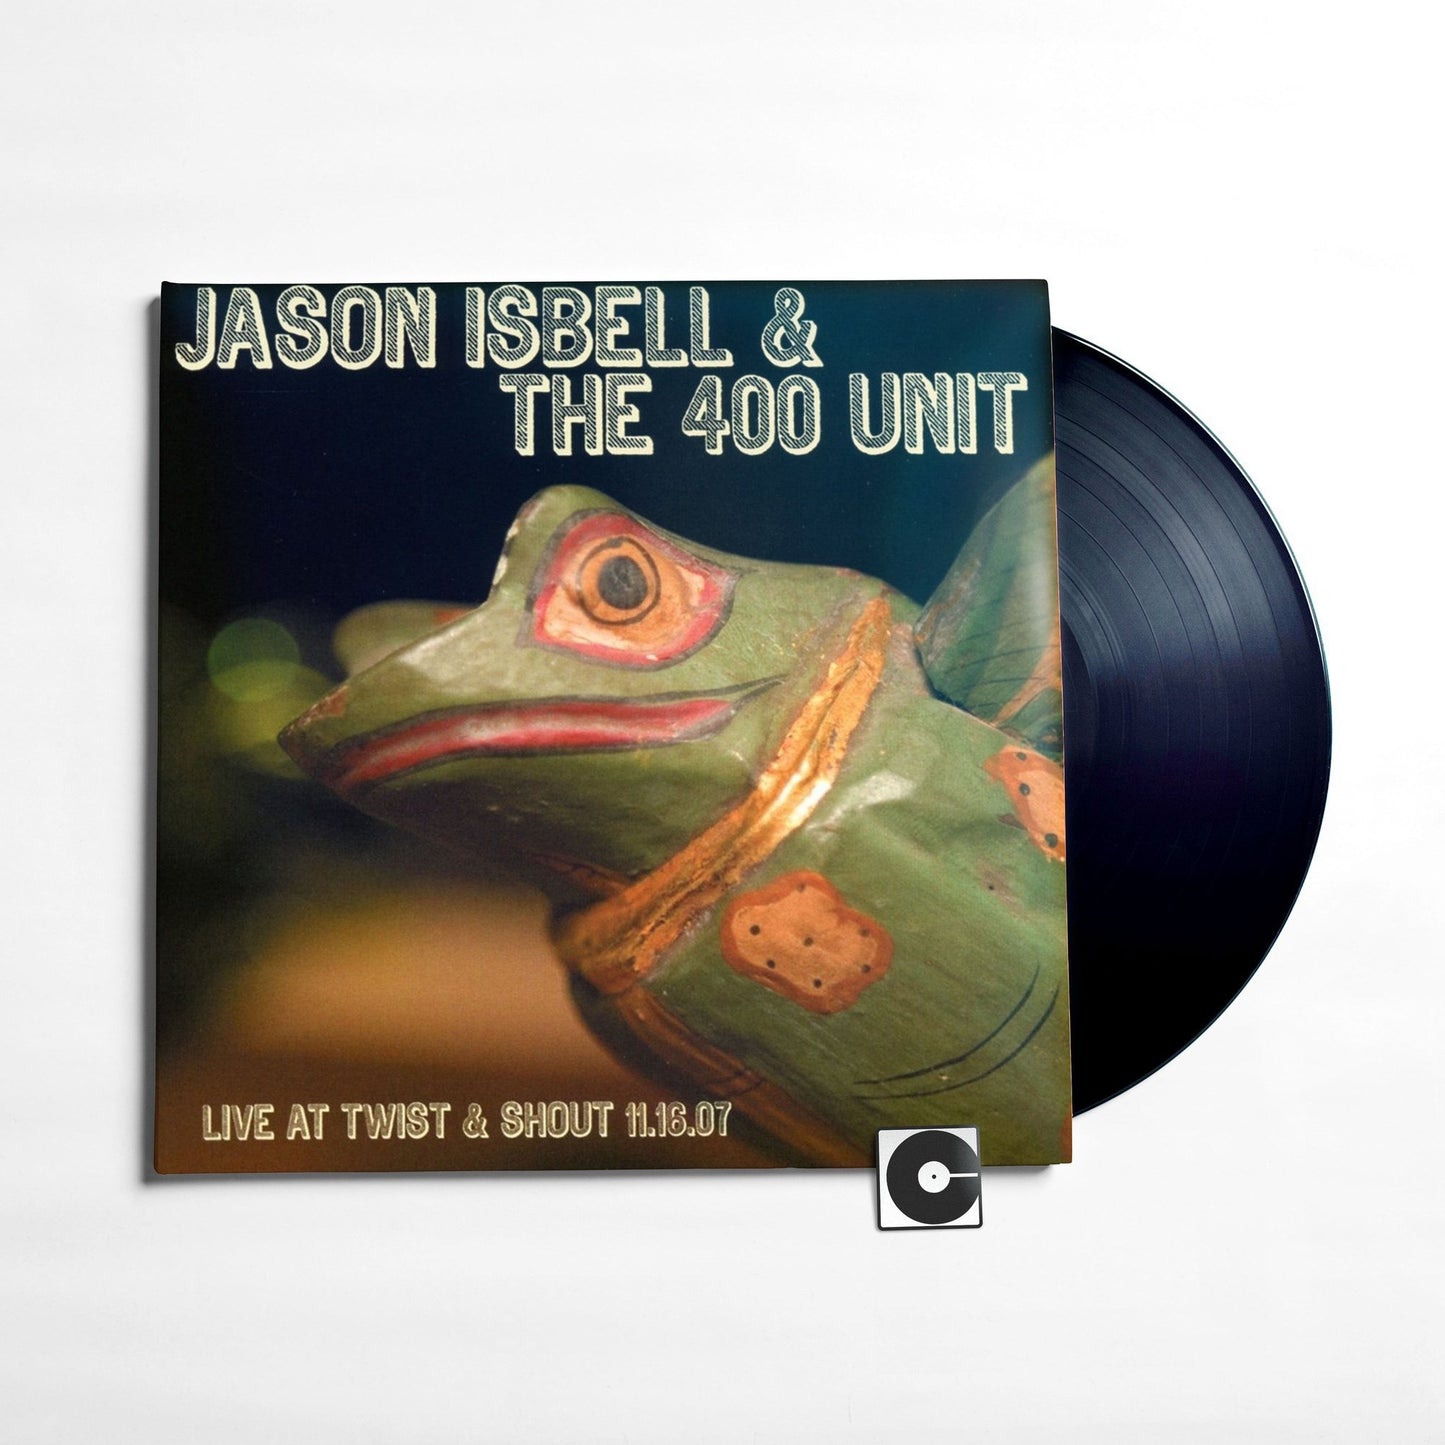 Jason Isbell & The 400 Unit - "Live From Twist & Shout 11.16.07"